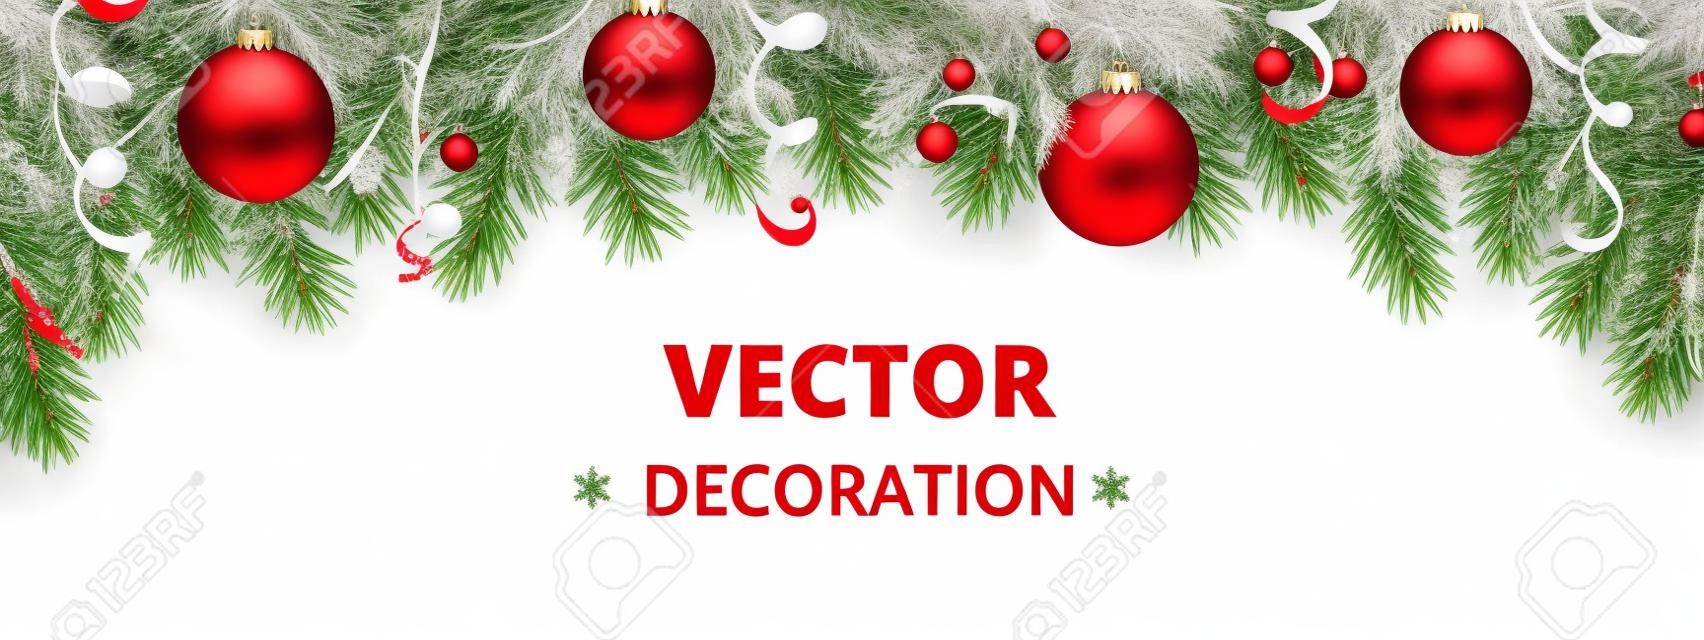 Winter holiday background. Border with Christmas tree branches isolated on white. Garland, frame with hanging baubles, streamers. Great for Christmas, New year cards, banners, headers, party posters.